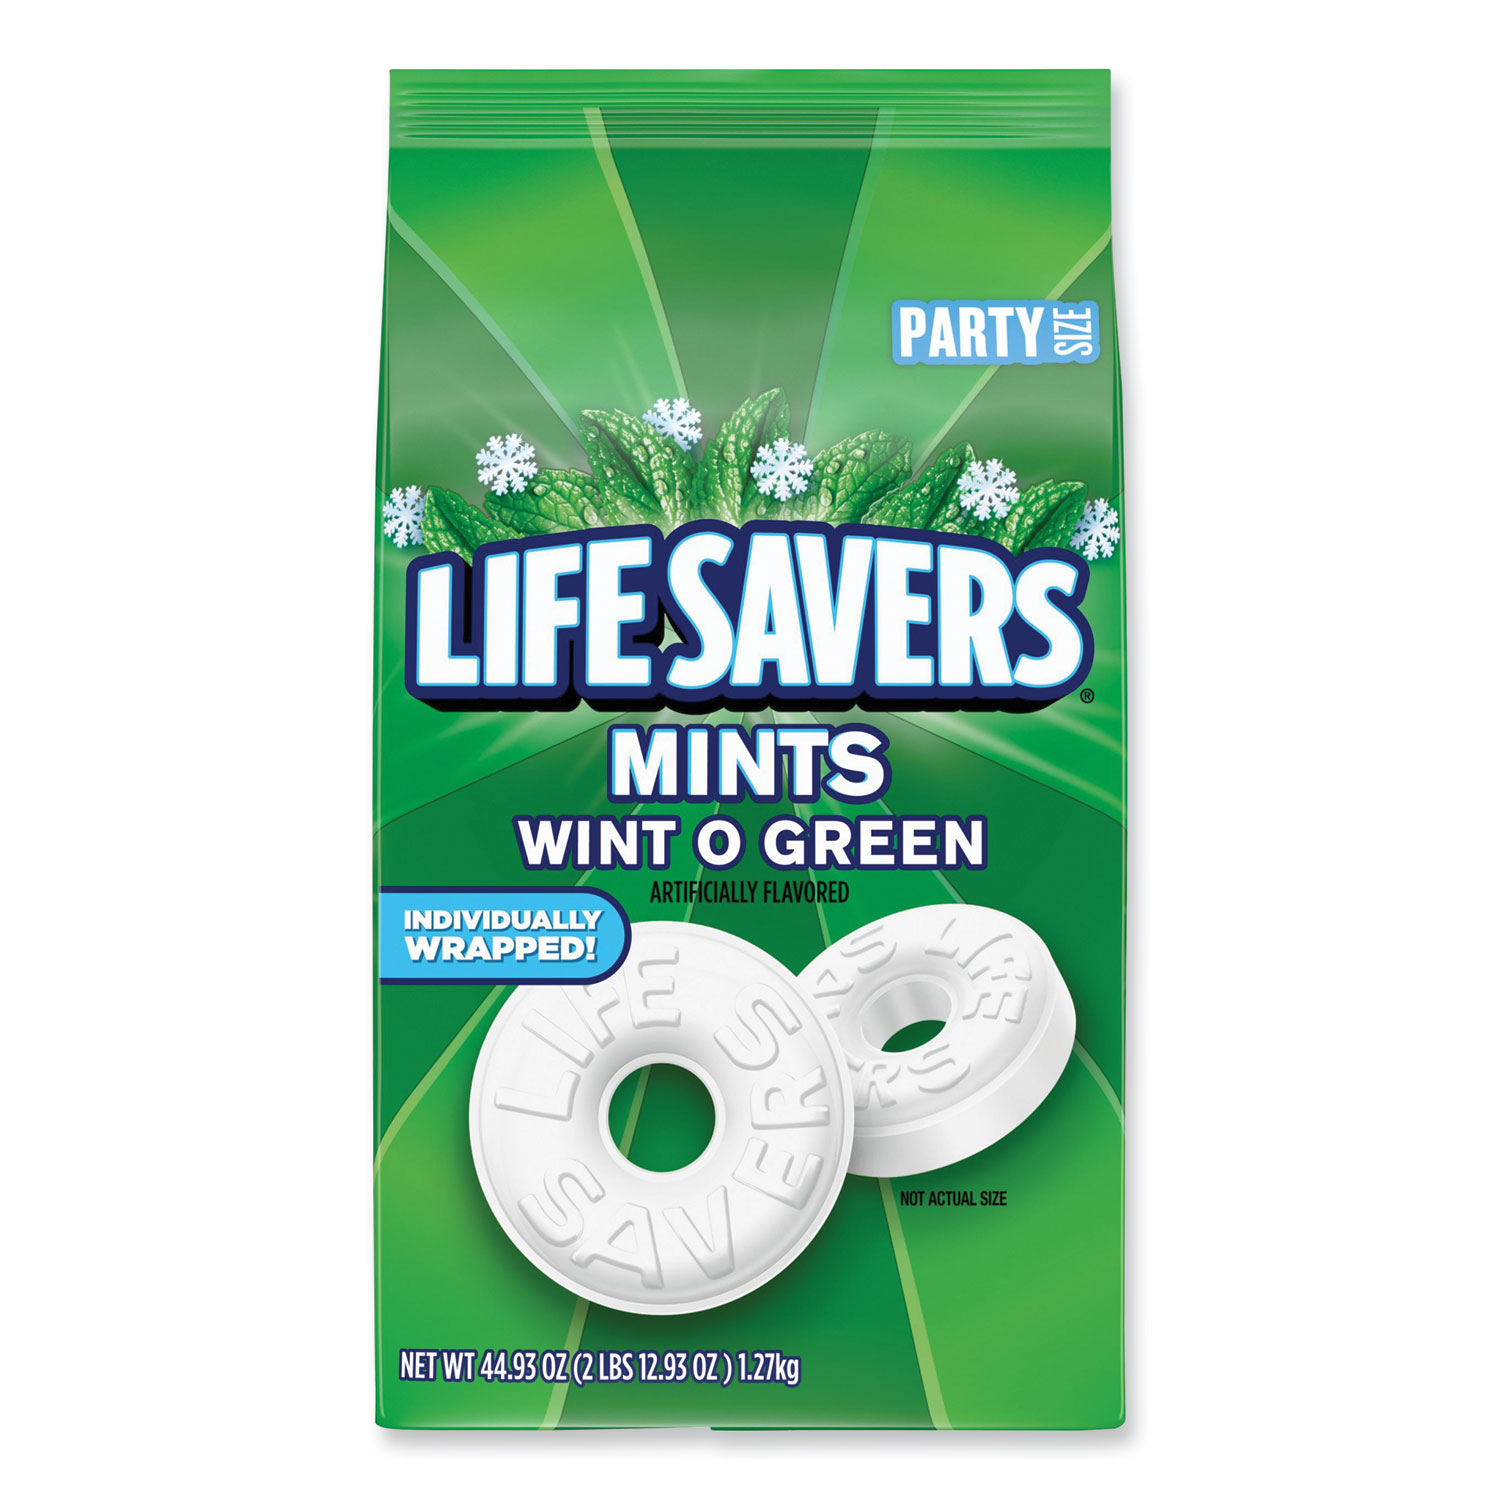 PAPER MINT(Candy)